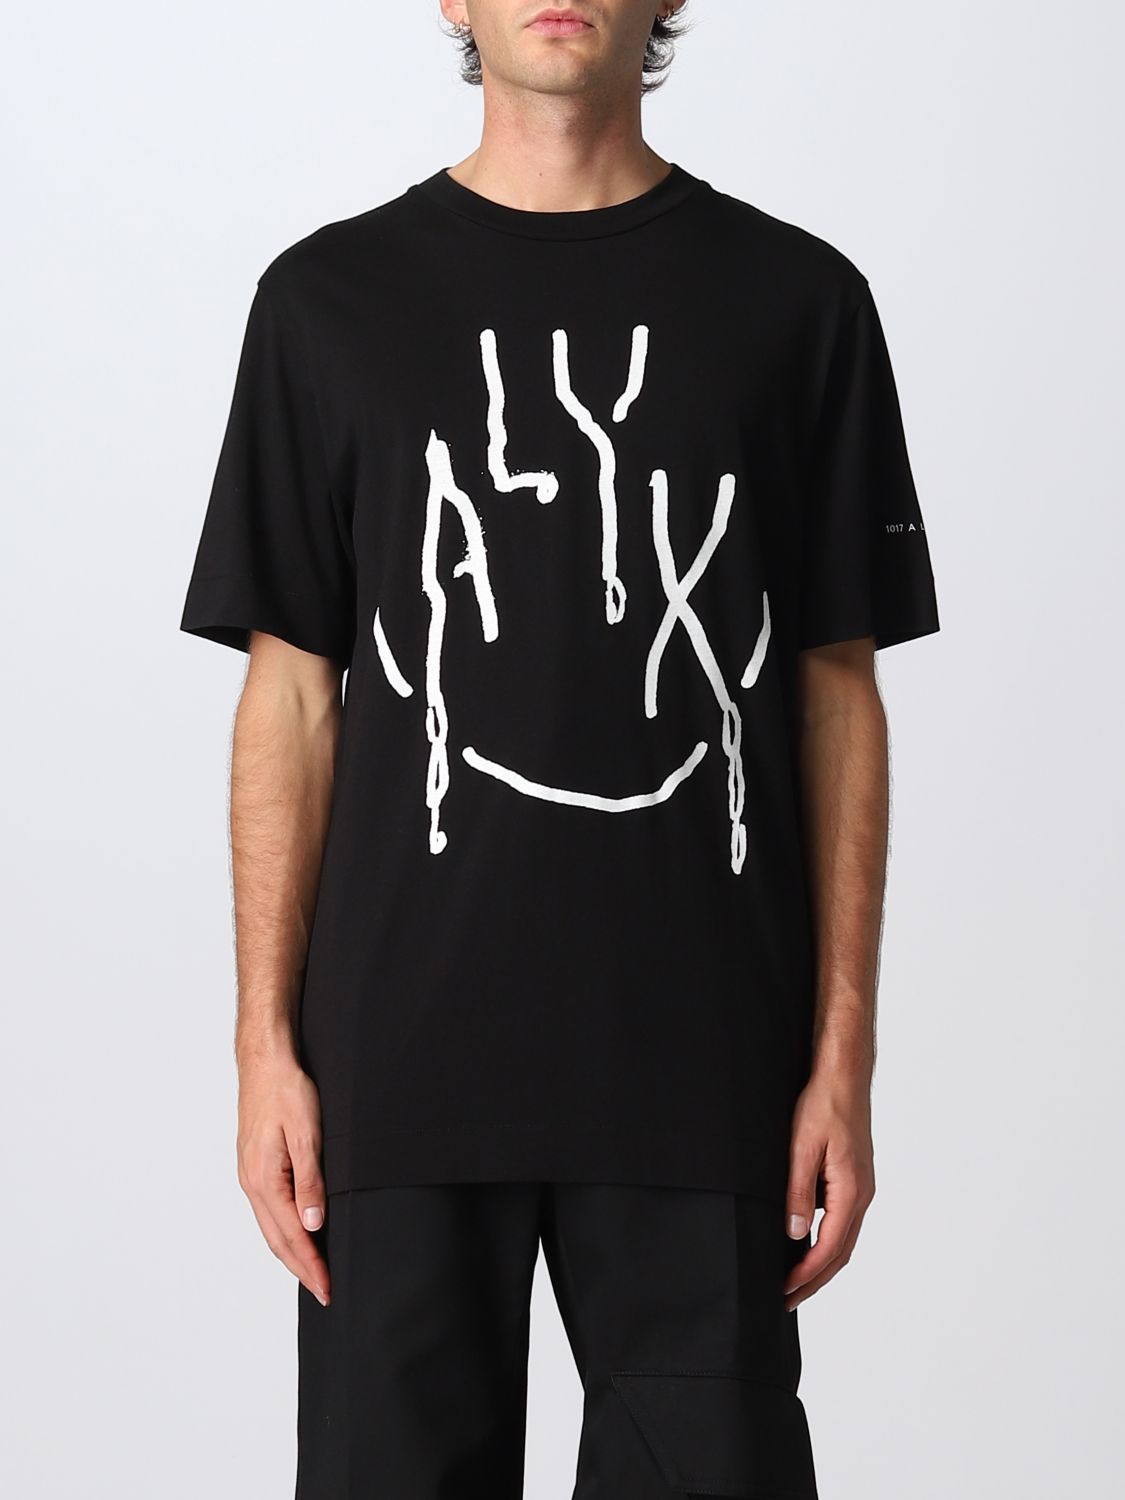 ALYX: t-shirt for man - Black | Alyx t-shirt AAMTS0336FA01 online on ...